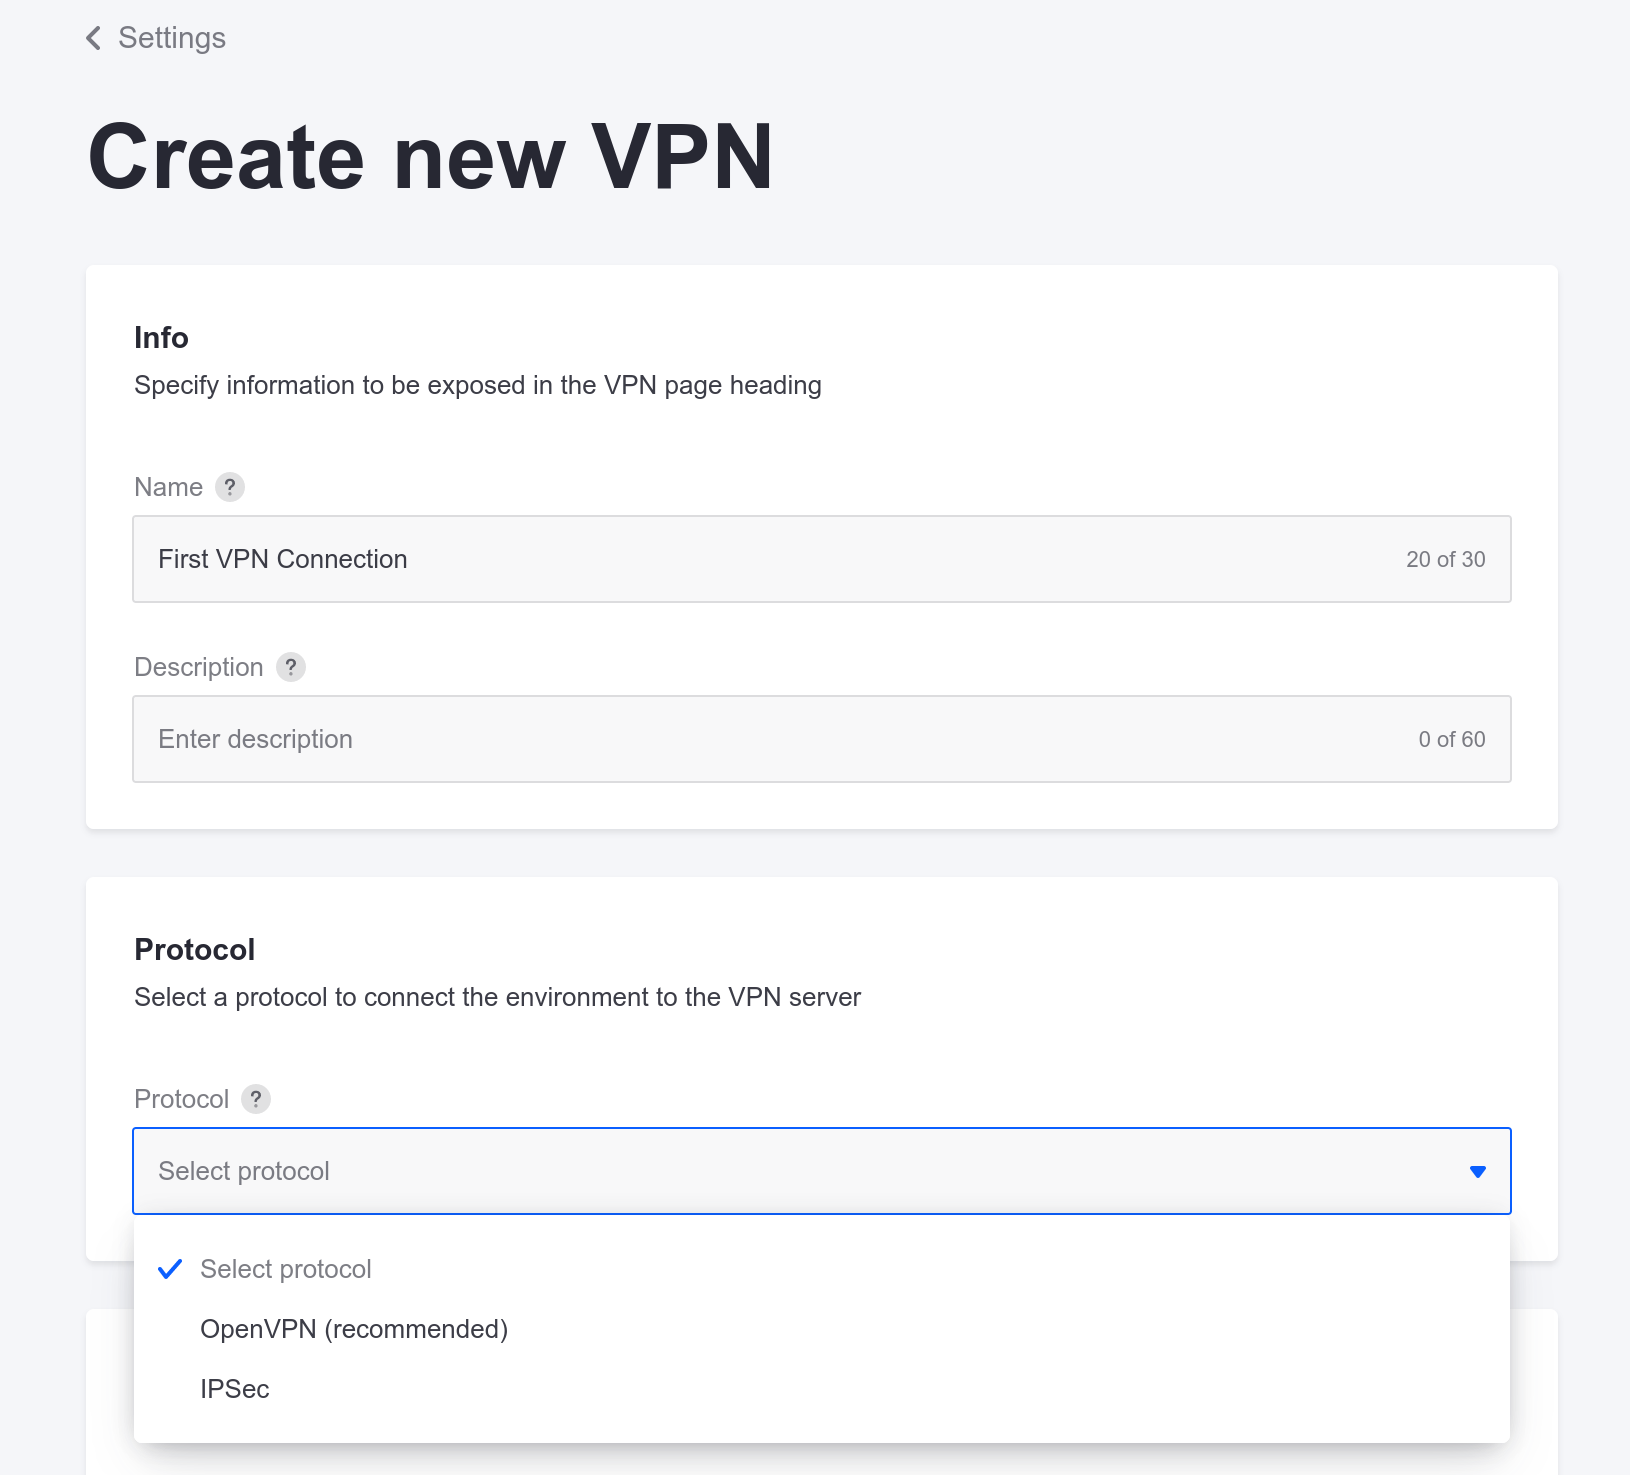 Select the protocol to use to connect to a VPN.